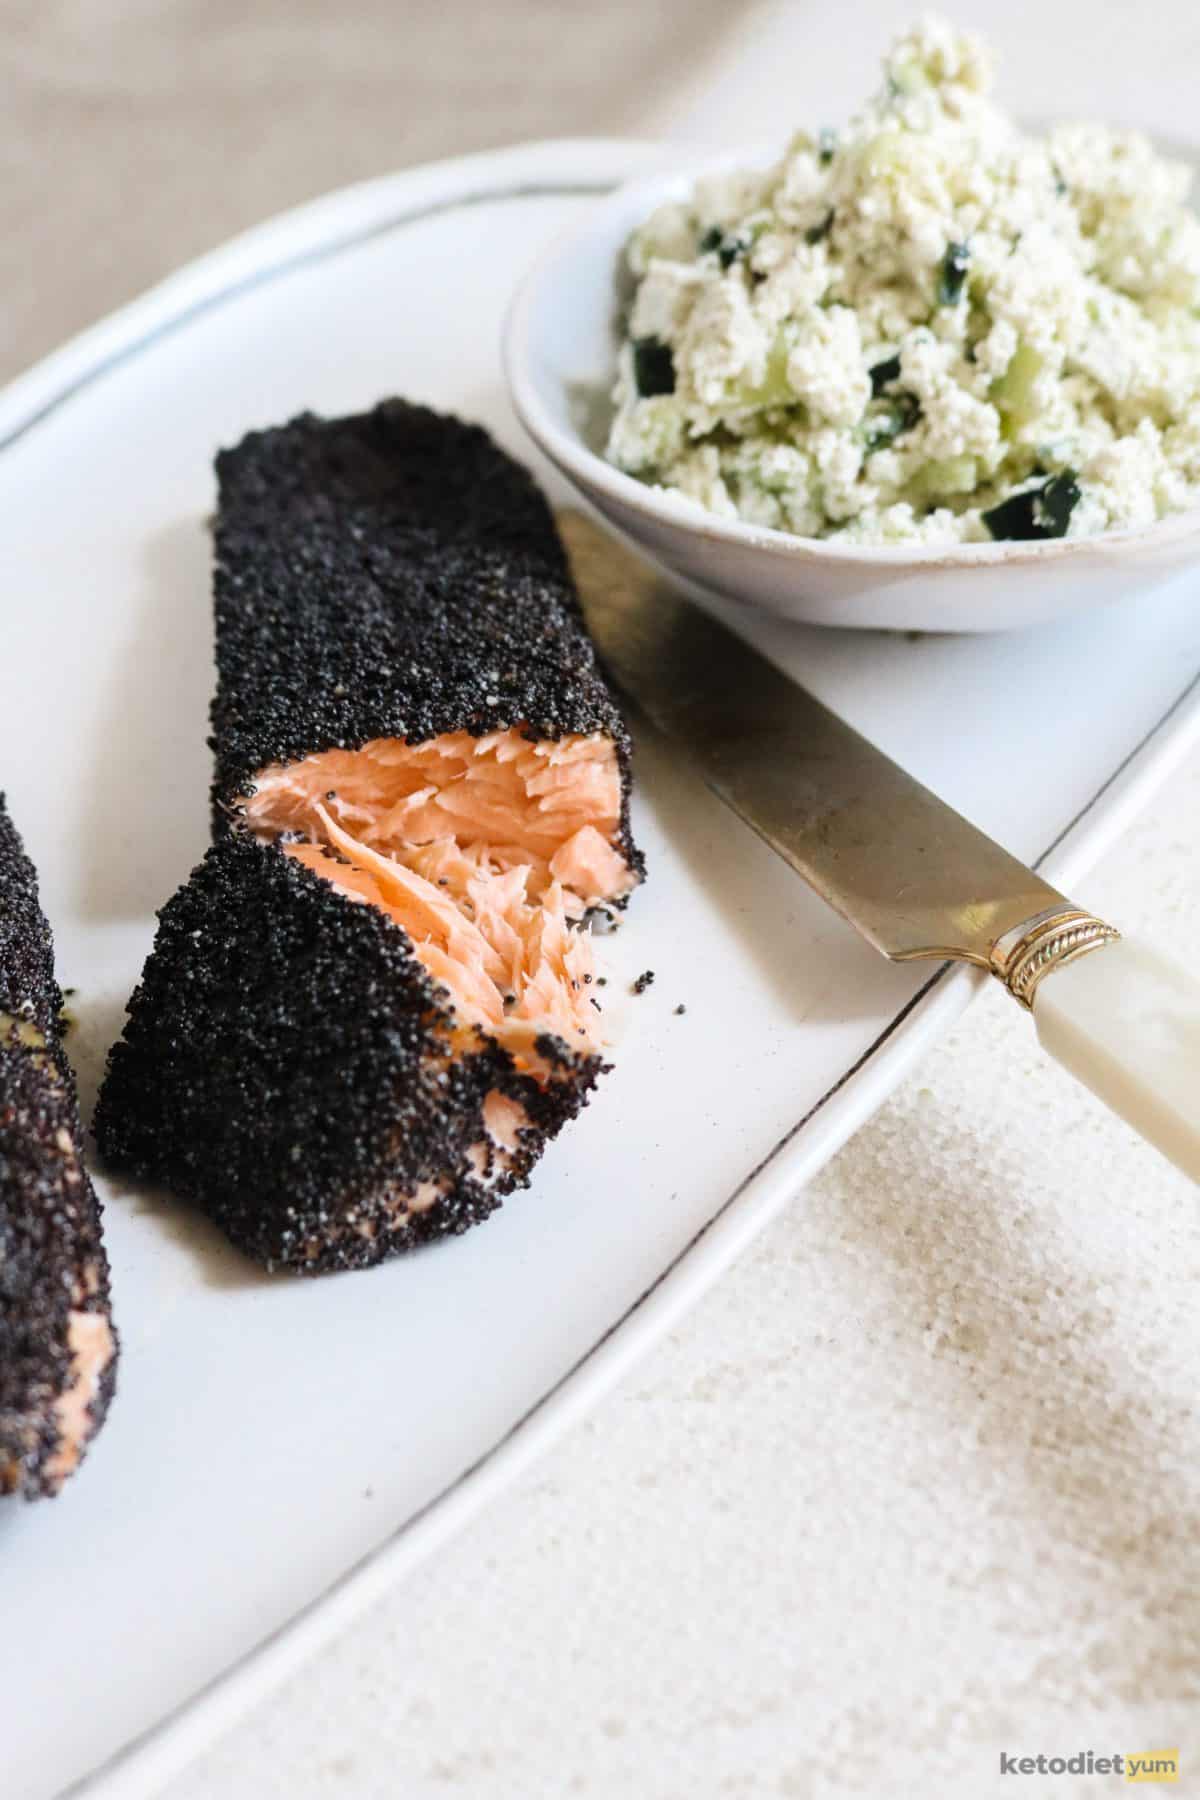 Poppy seed crusted salmon served with a refreshing goat cheese dip